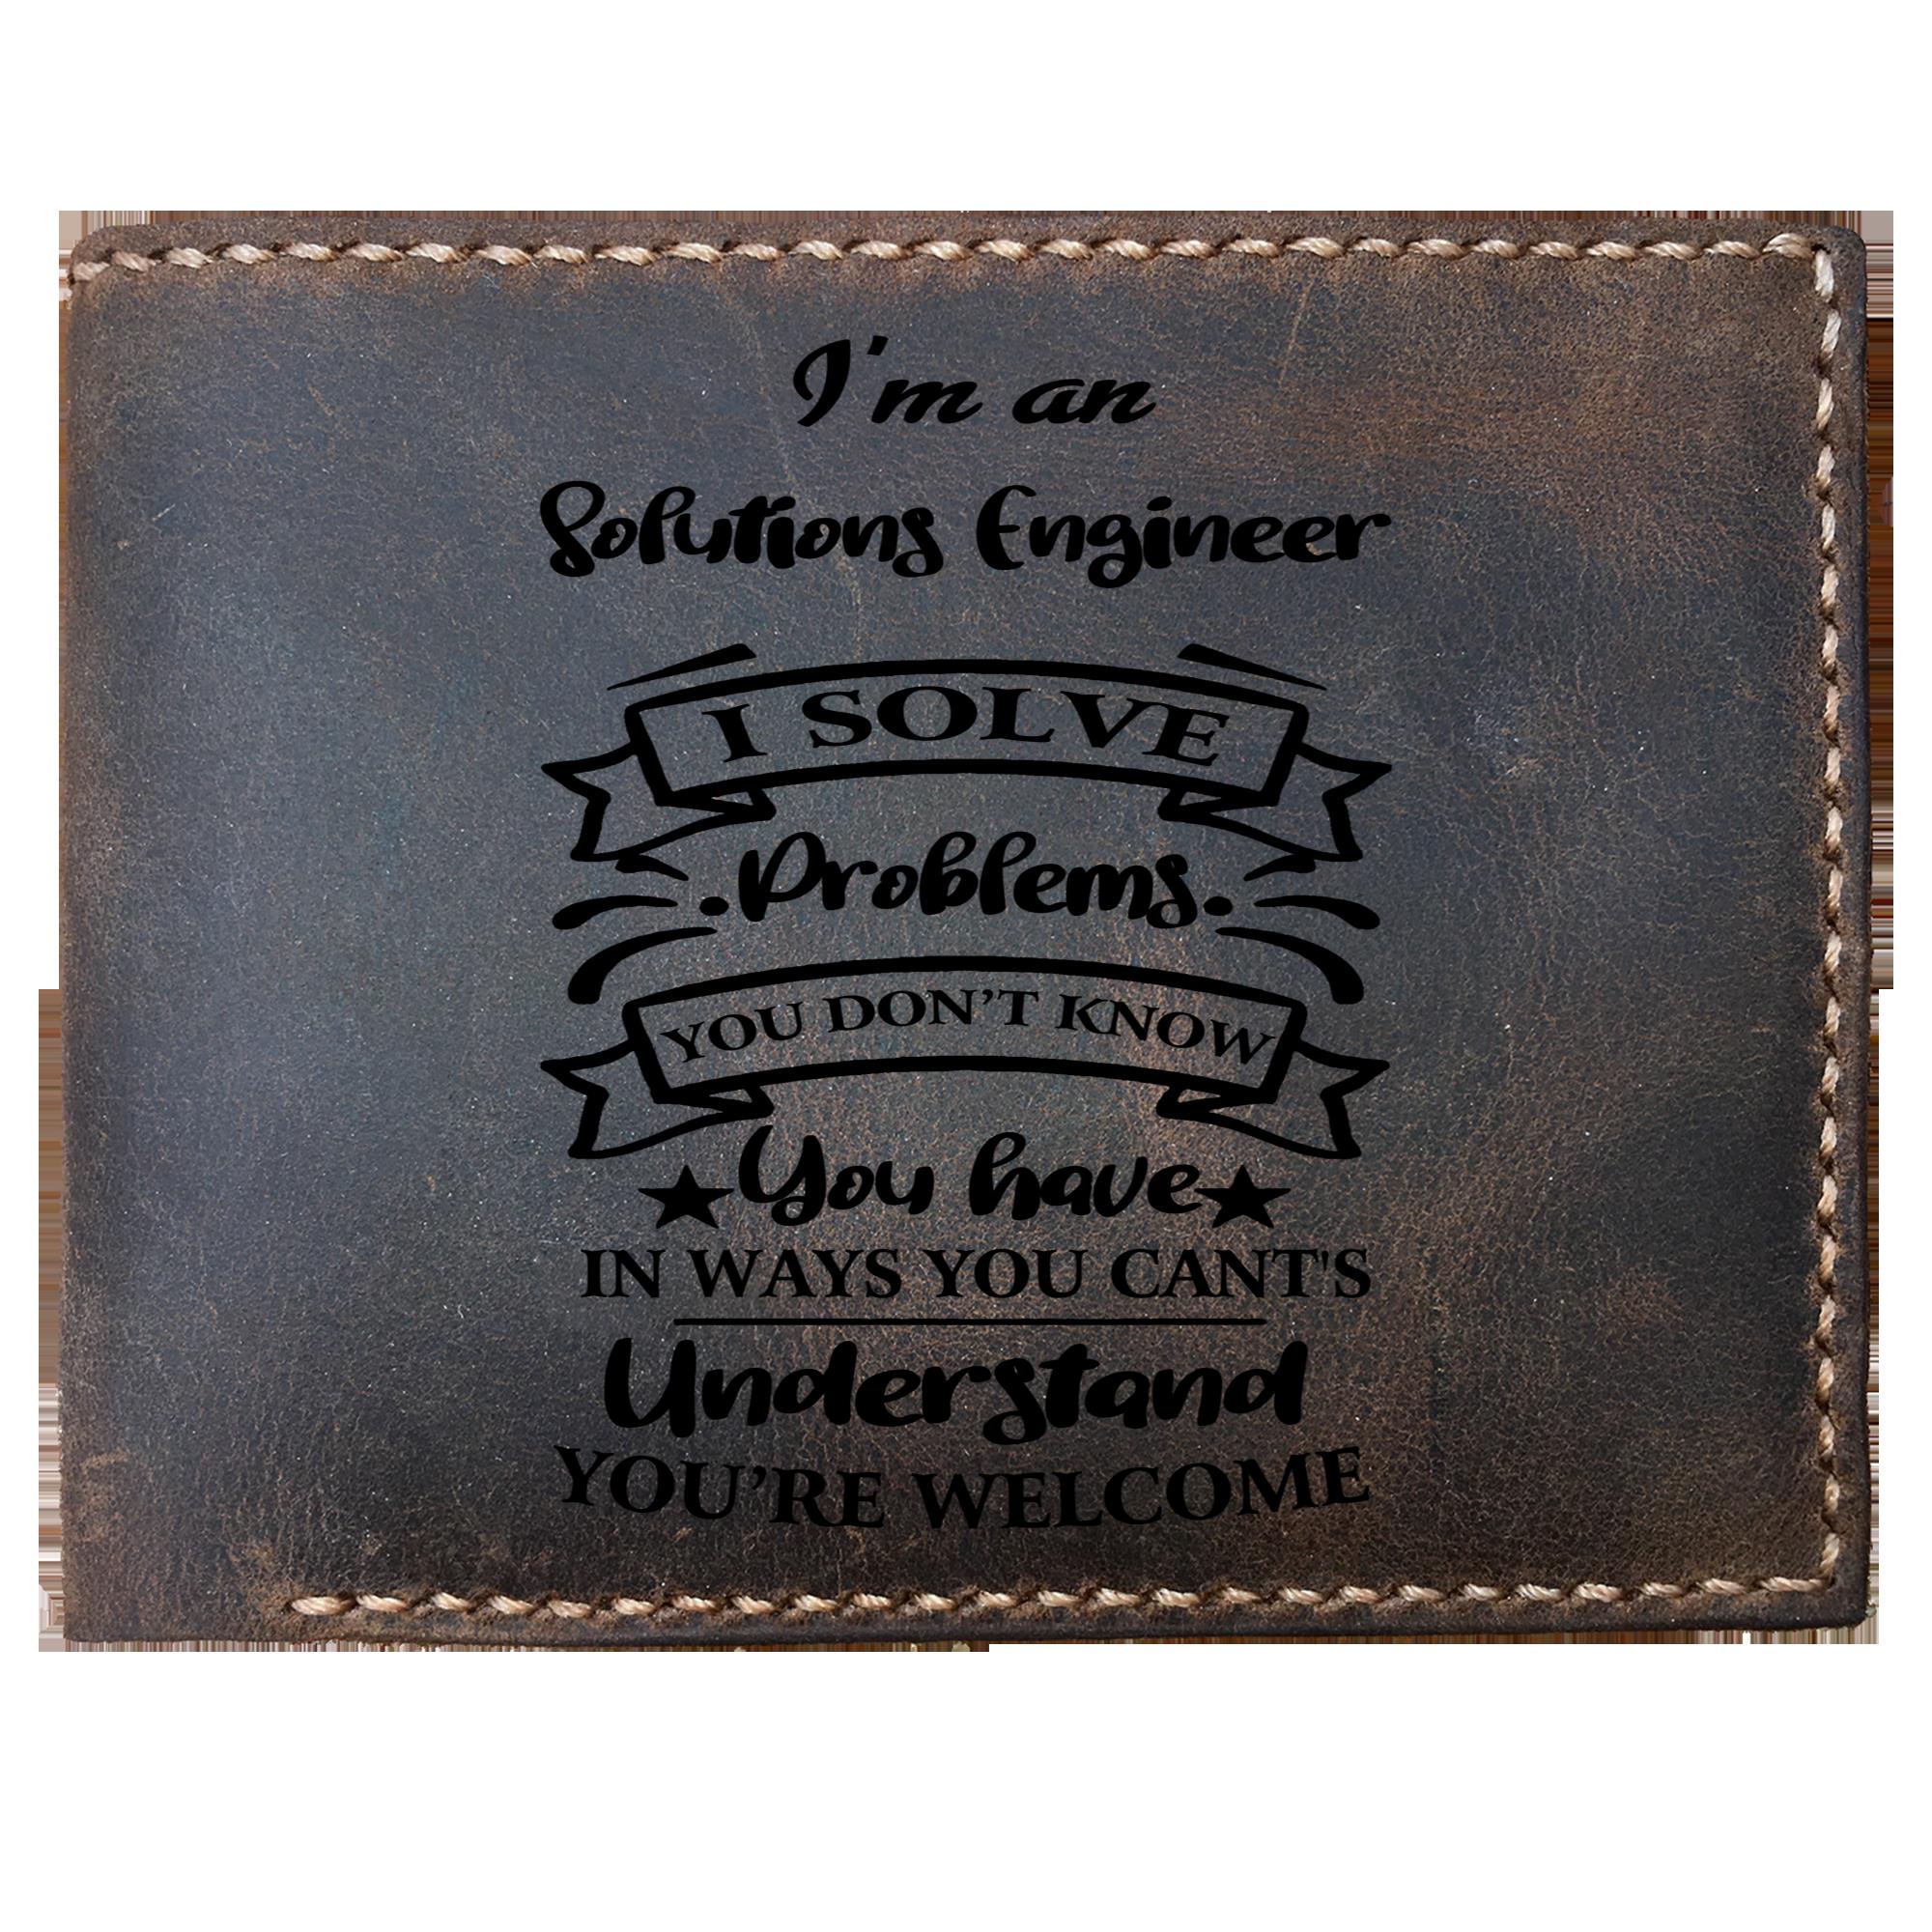 Skitongifts Funny Custom Laser Engraved Bifold Leather Wallet For Men, I'm an Solutions Engineer Solve Problems, Father's Day Gifts